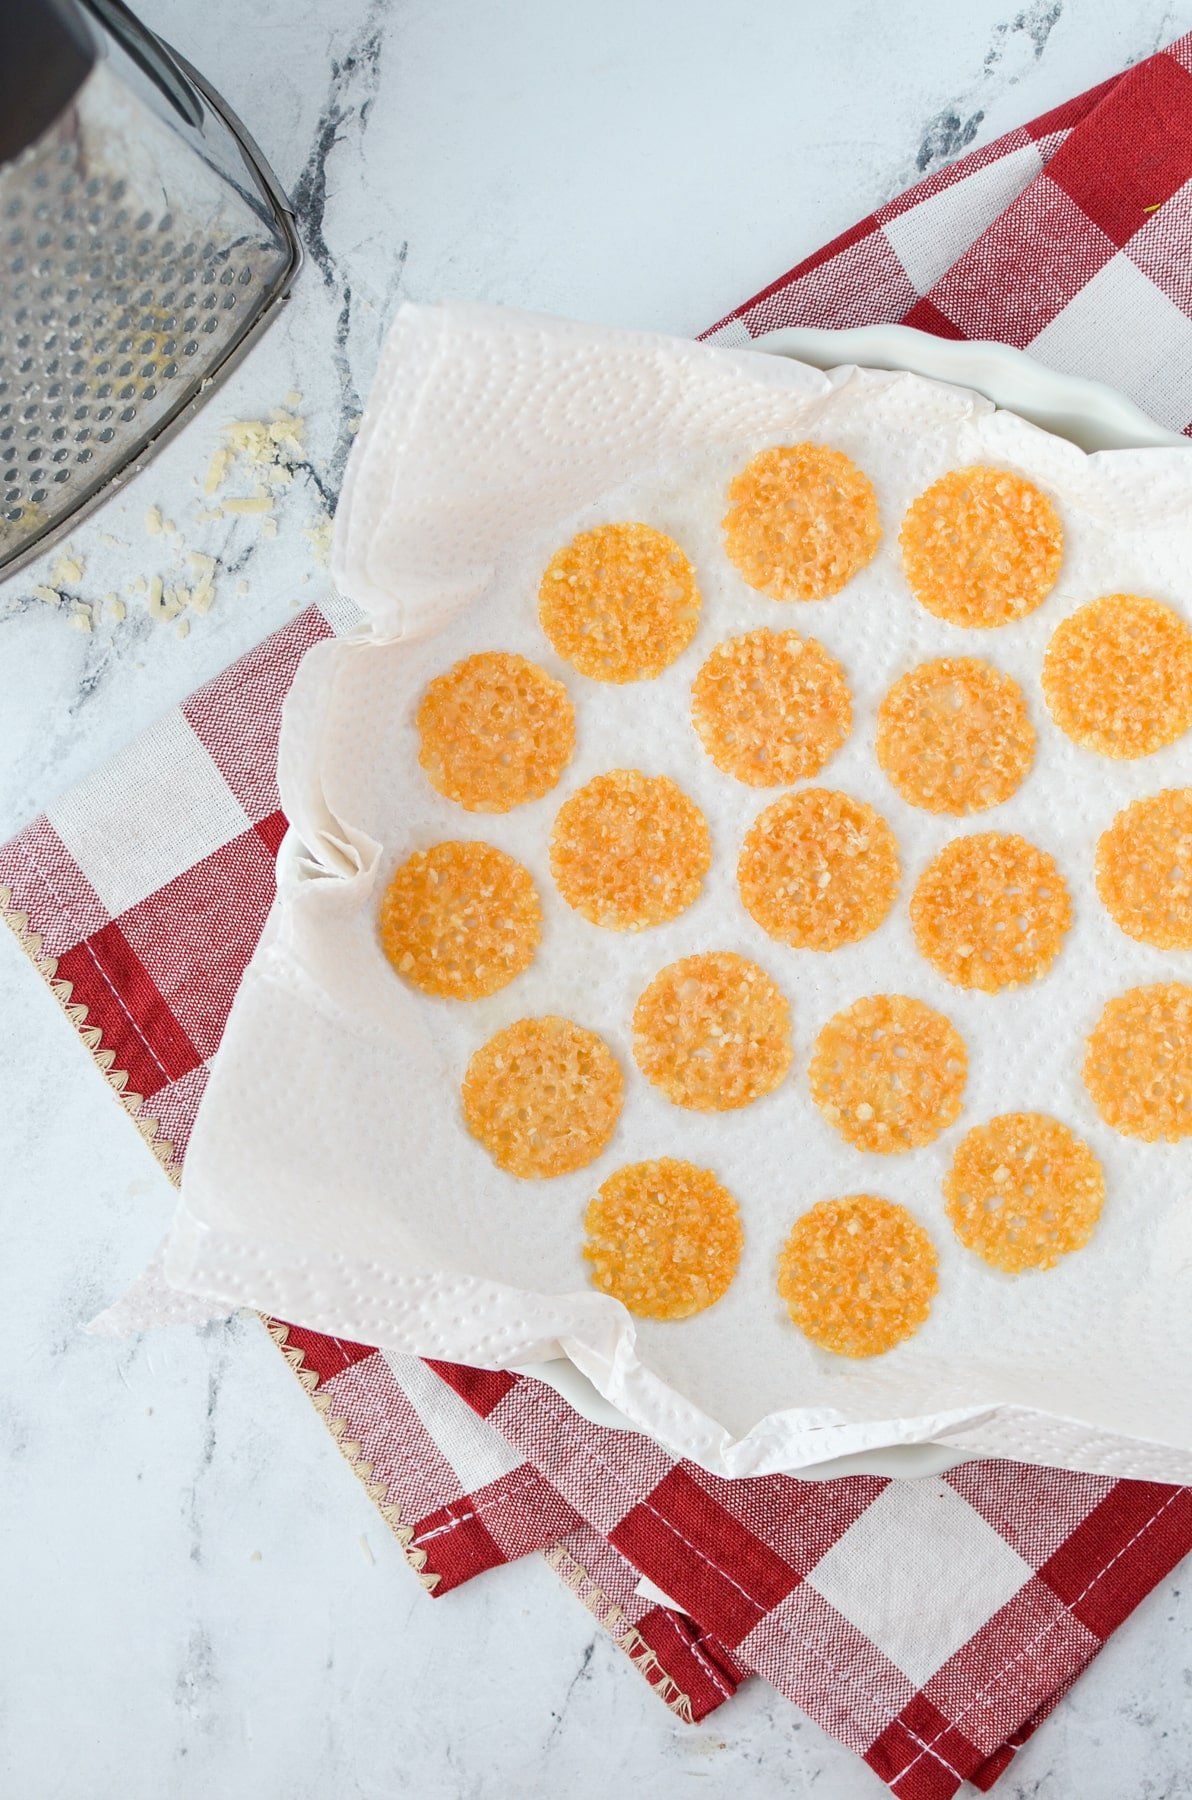 Adding parmesan crisps to a paper towel lined plate.